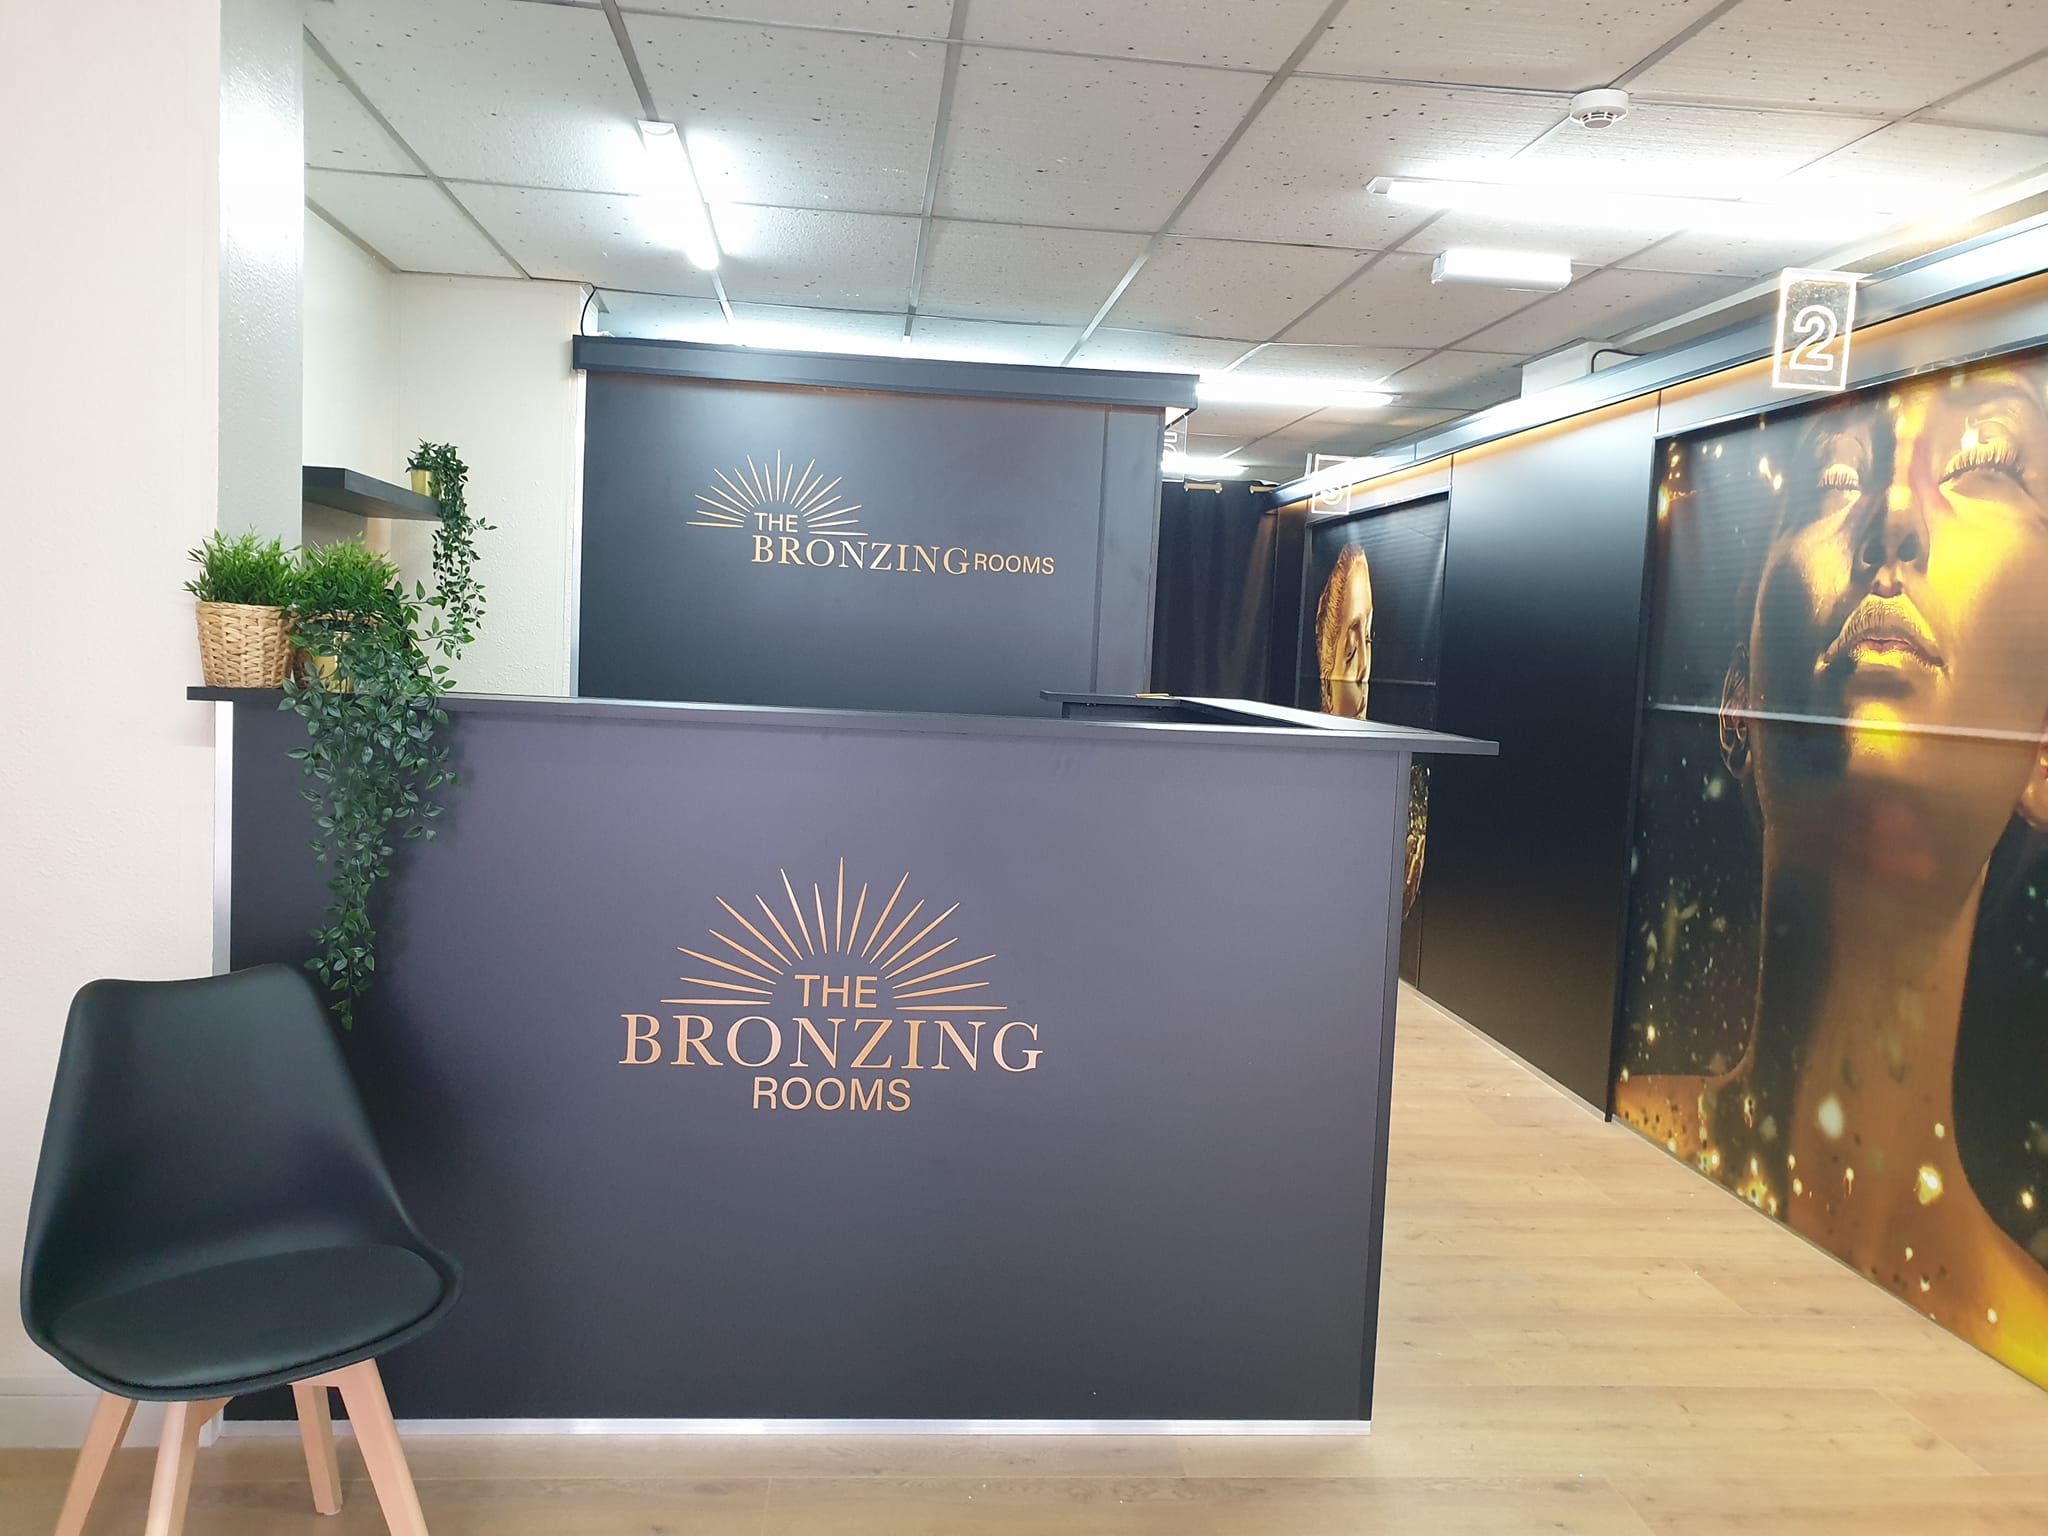 The Bronzing Rooms - a new luxury tanning studio - will open in Alfreton on Monday, March 20